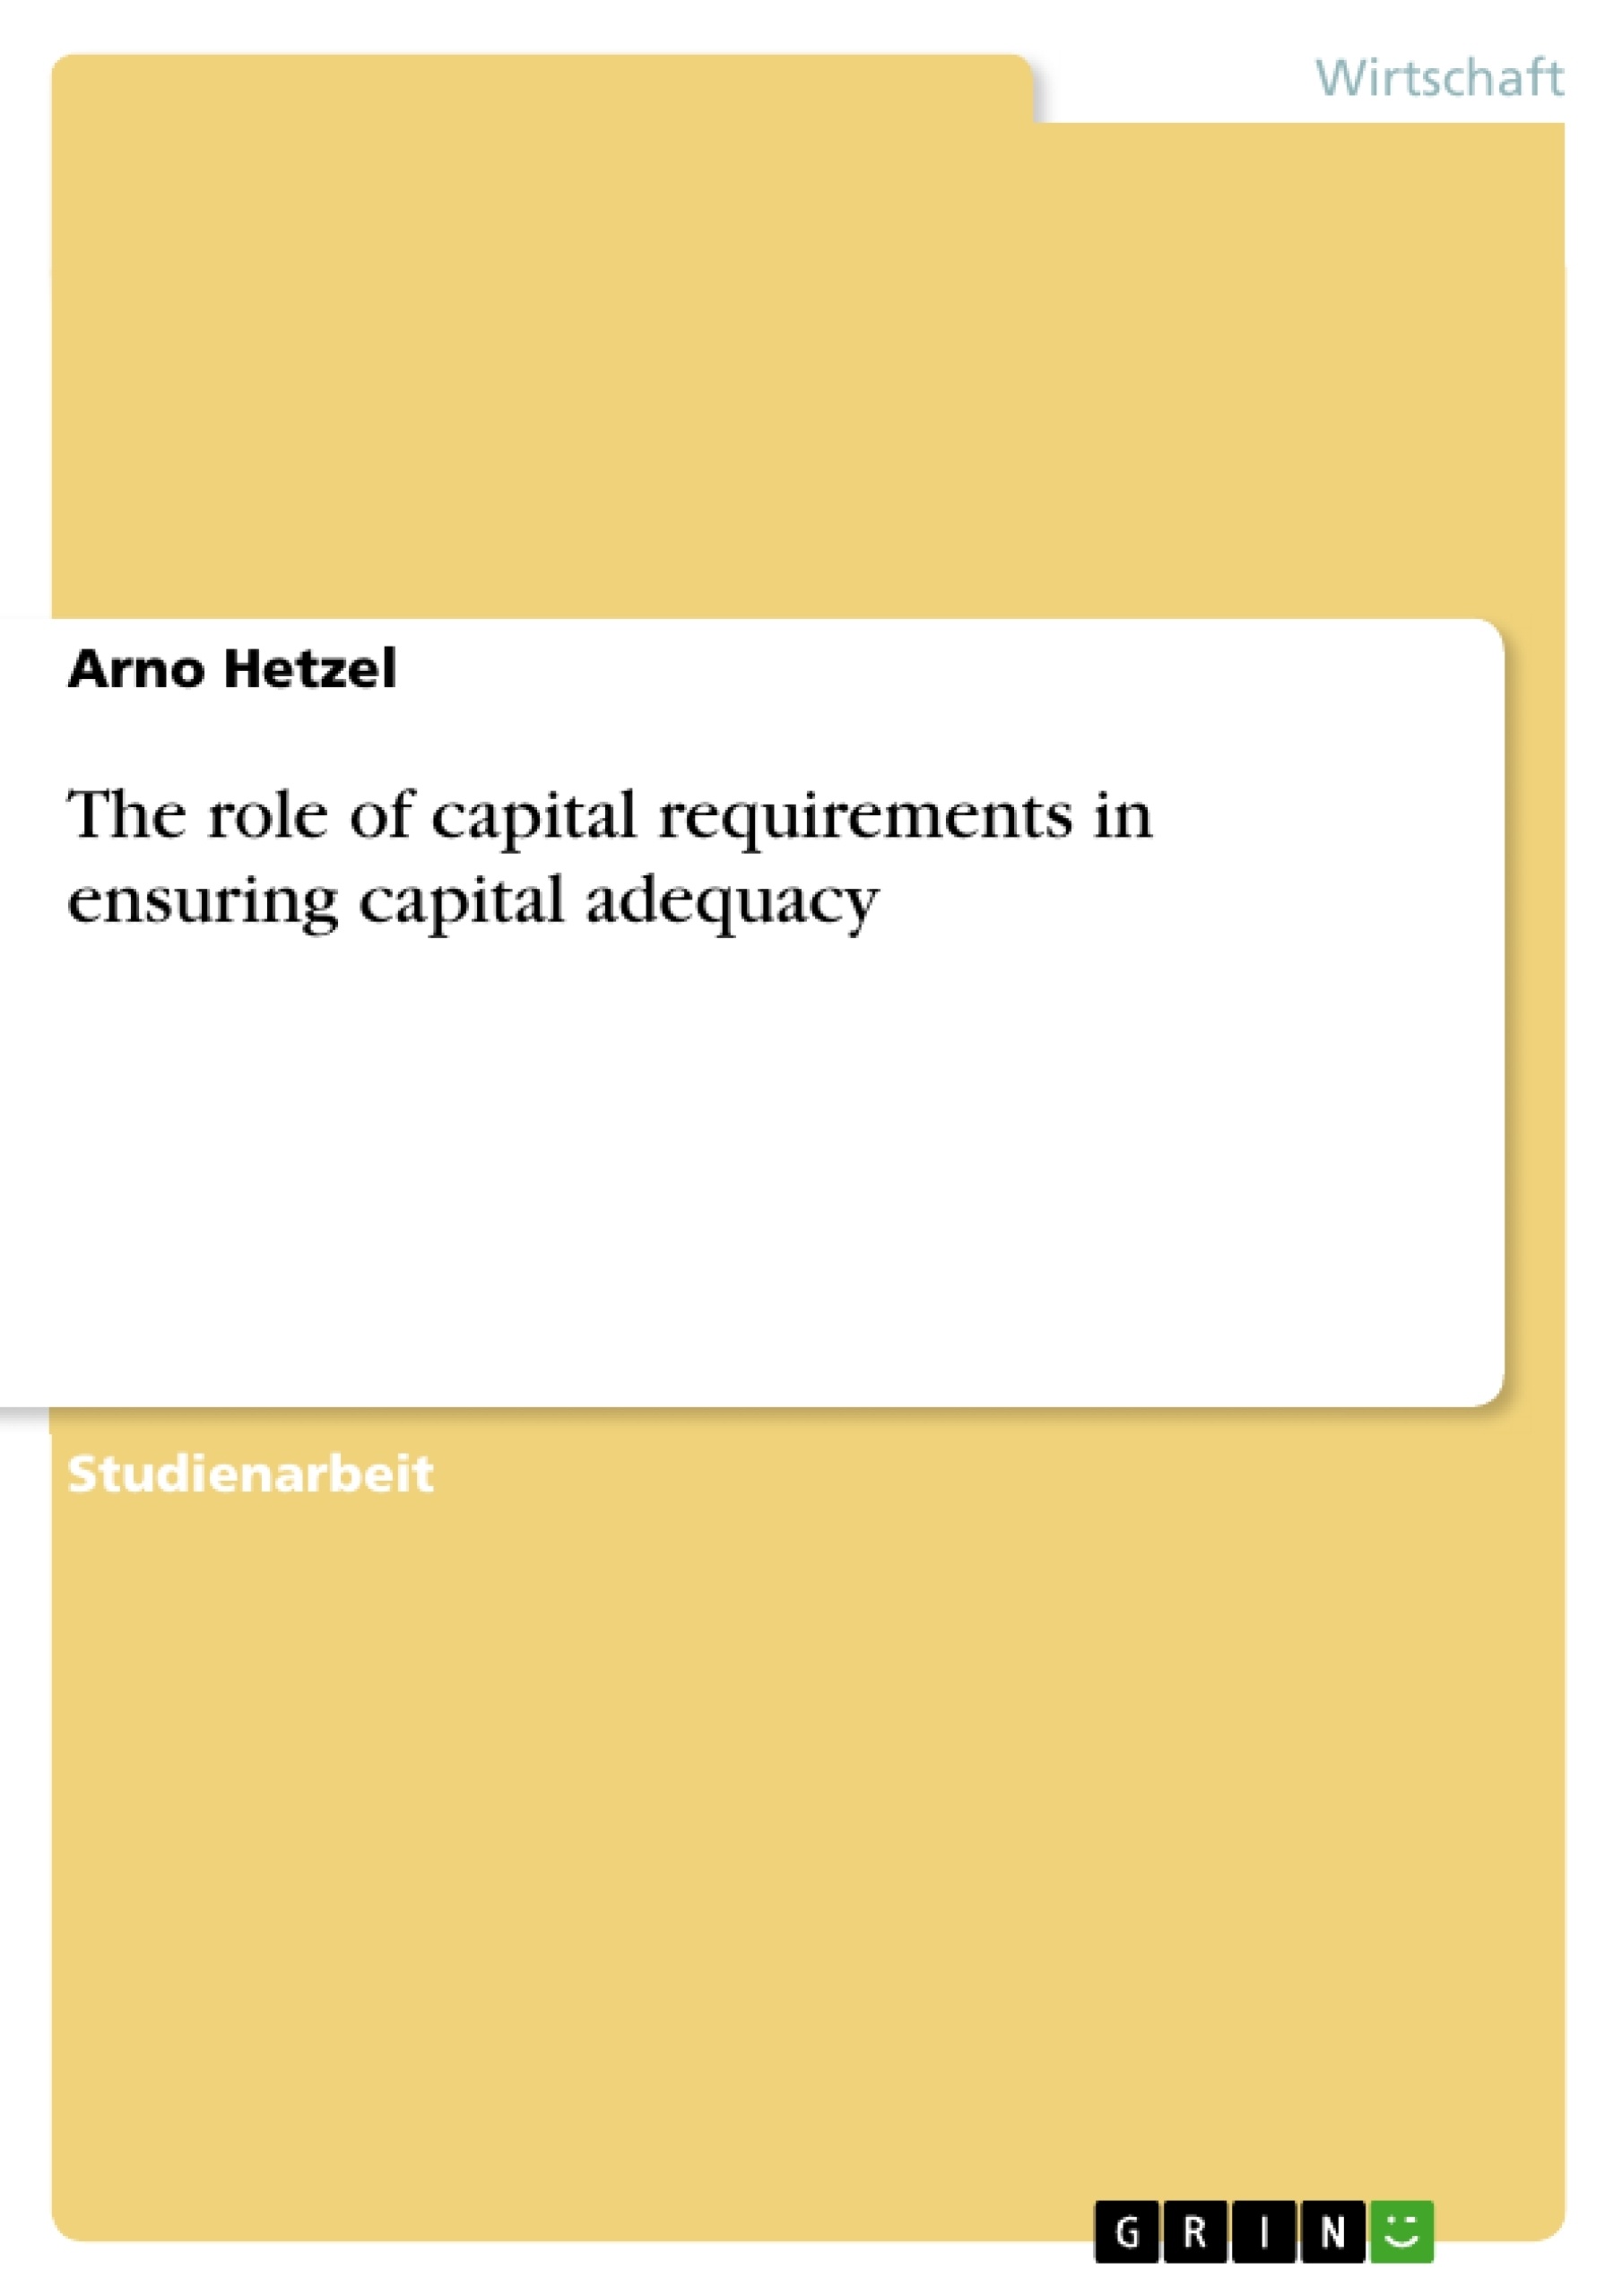 Titre: The role of capital requirements in ensuring capital adequacy